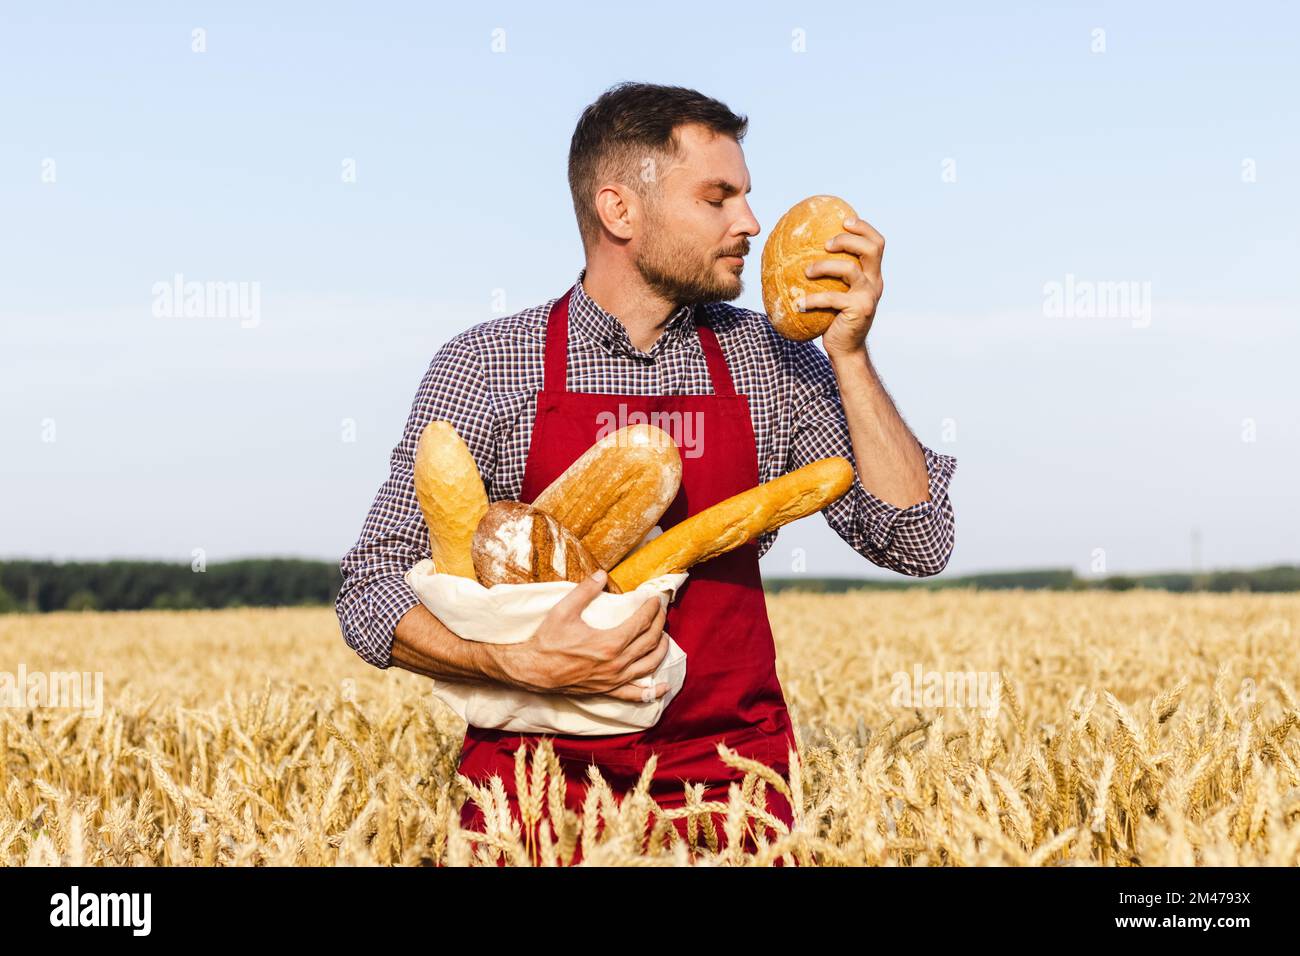 Man in apron standing in wheat field and smelling fresh bread. Stock Photo